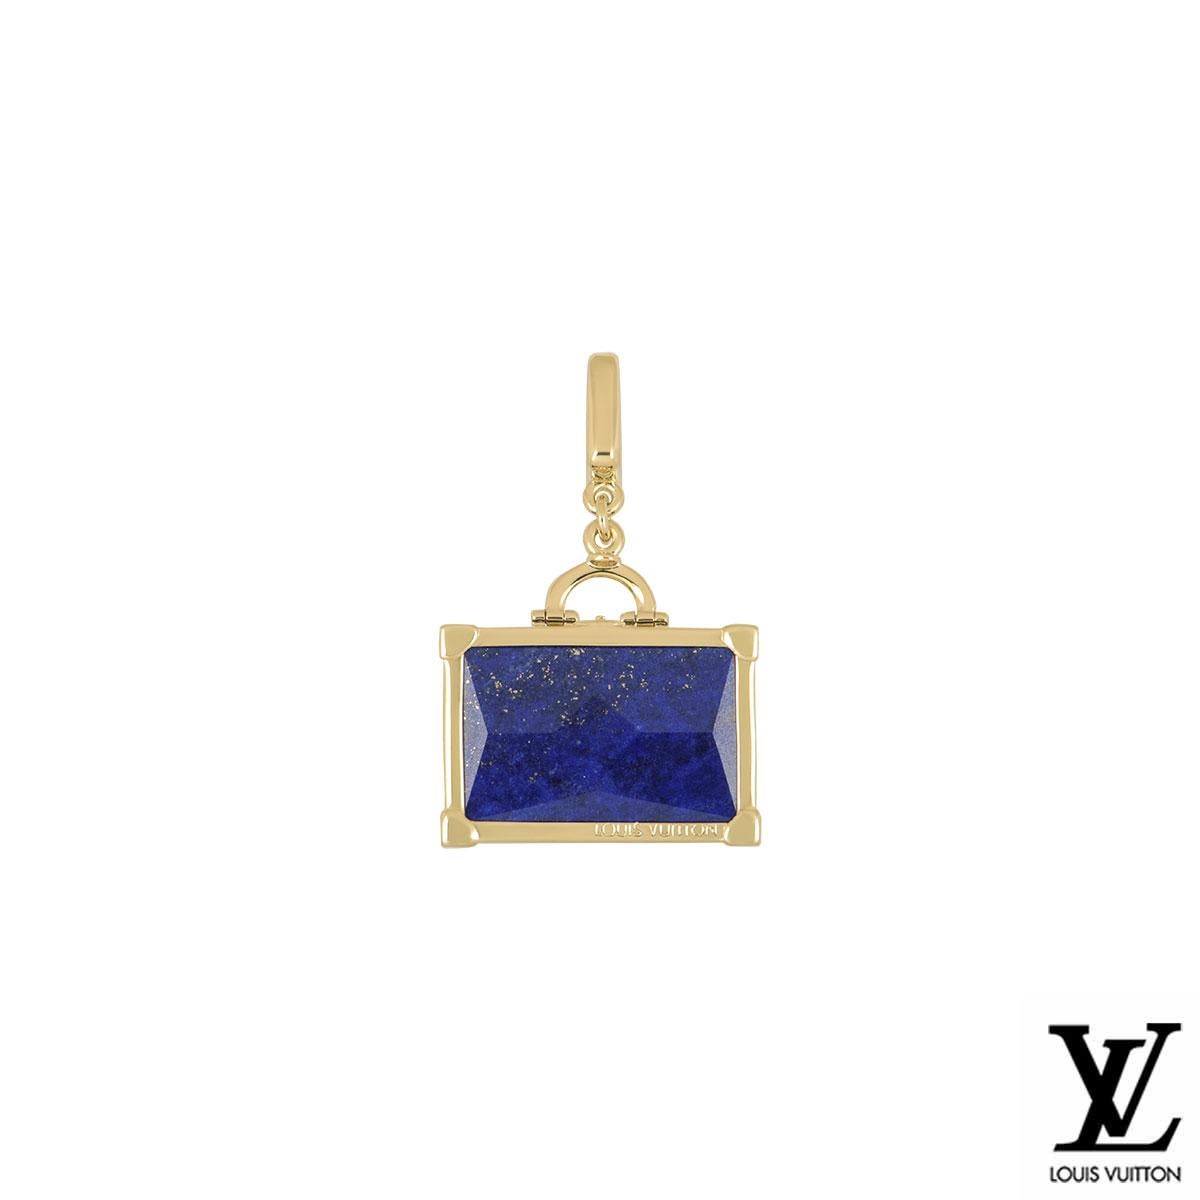 An 18k yellow gold suitcase charm by Louis Vuitton. The charm is in the design of a suitcase set with a lapis lazuli centre with yellow gold borders. The charm features a push clasp and measures 1.50cm in width and 2.20cm in length and has a gross